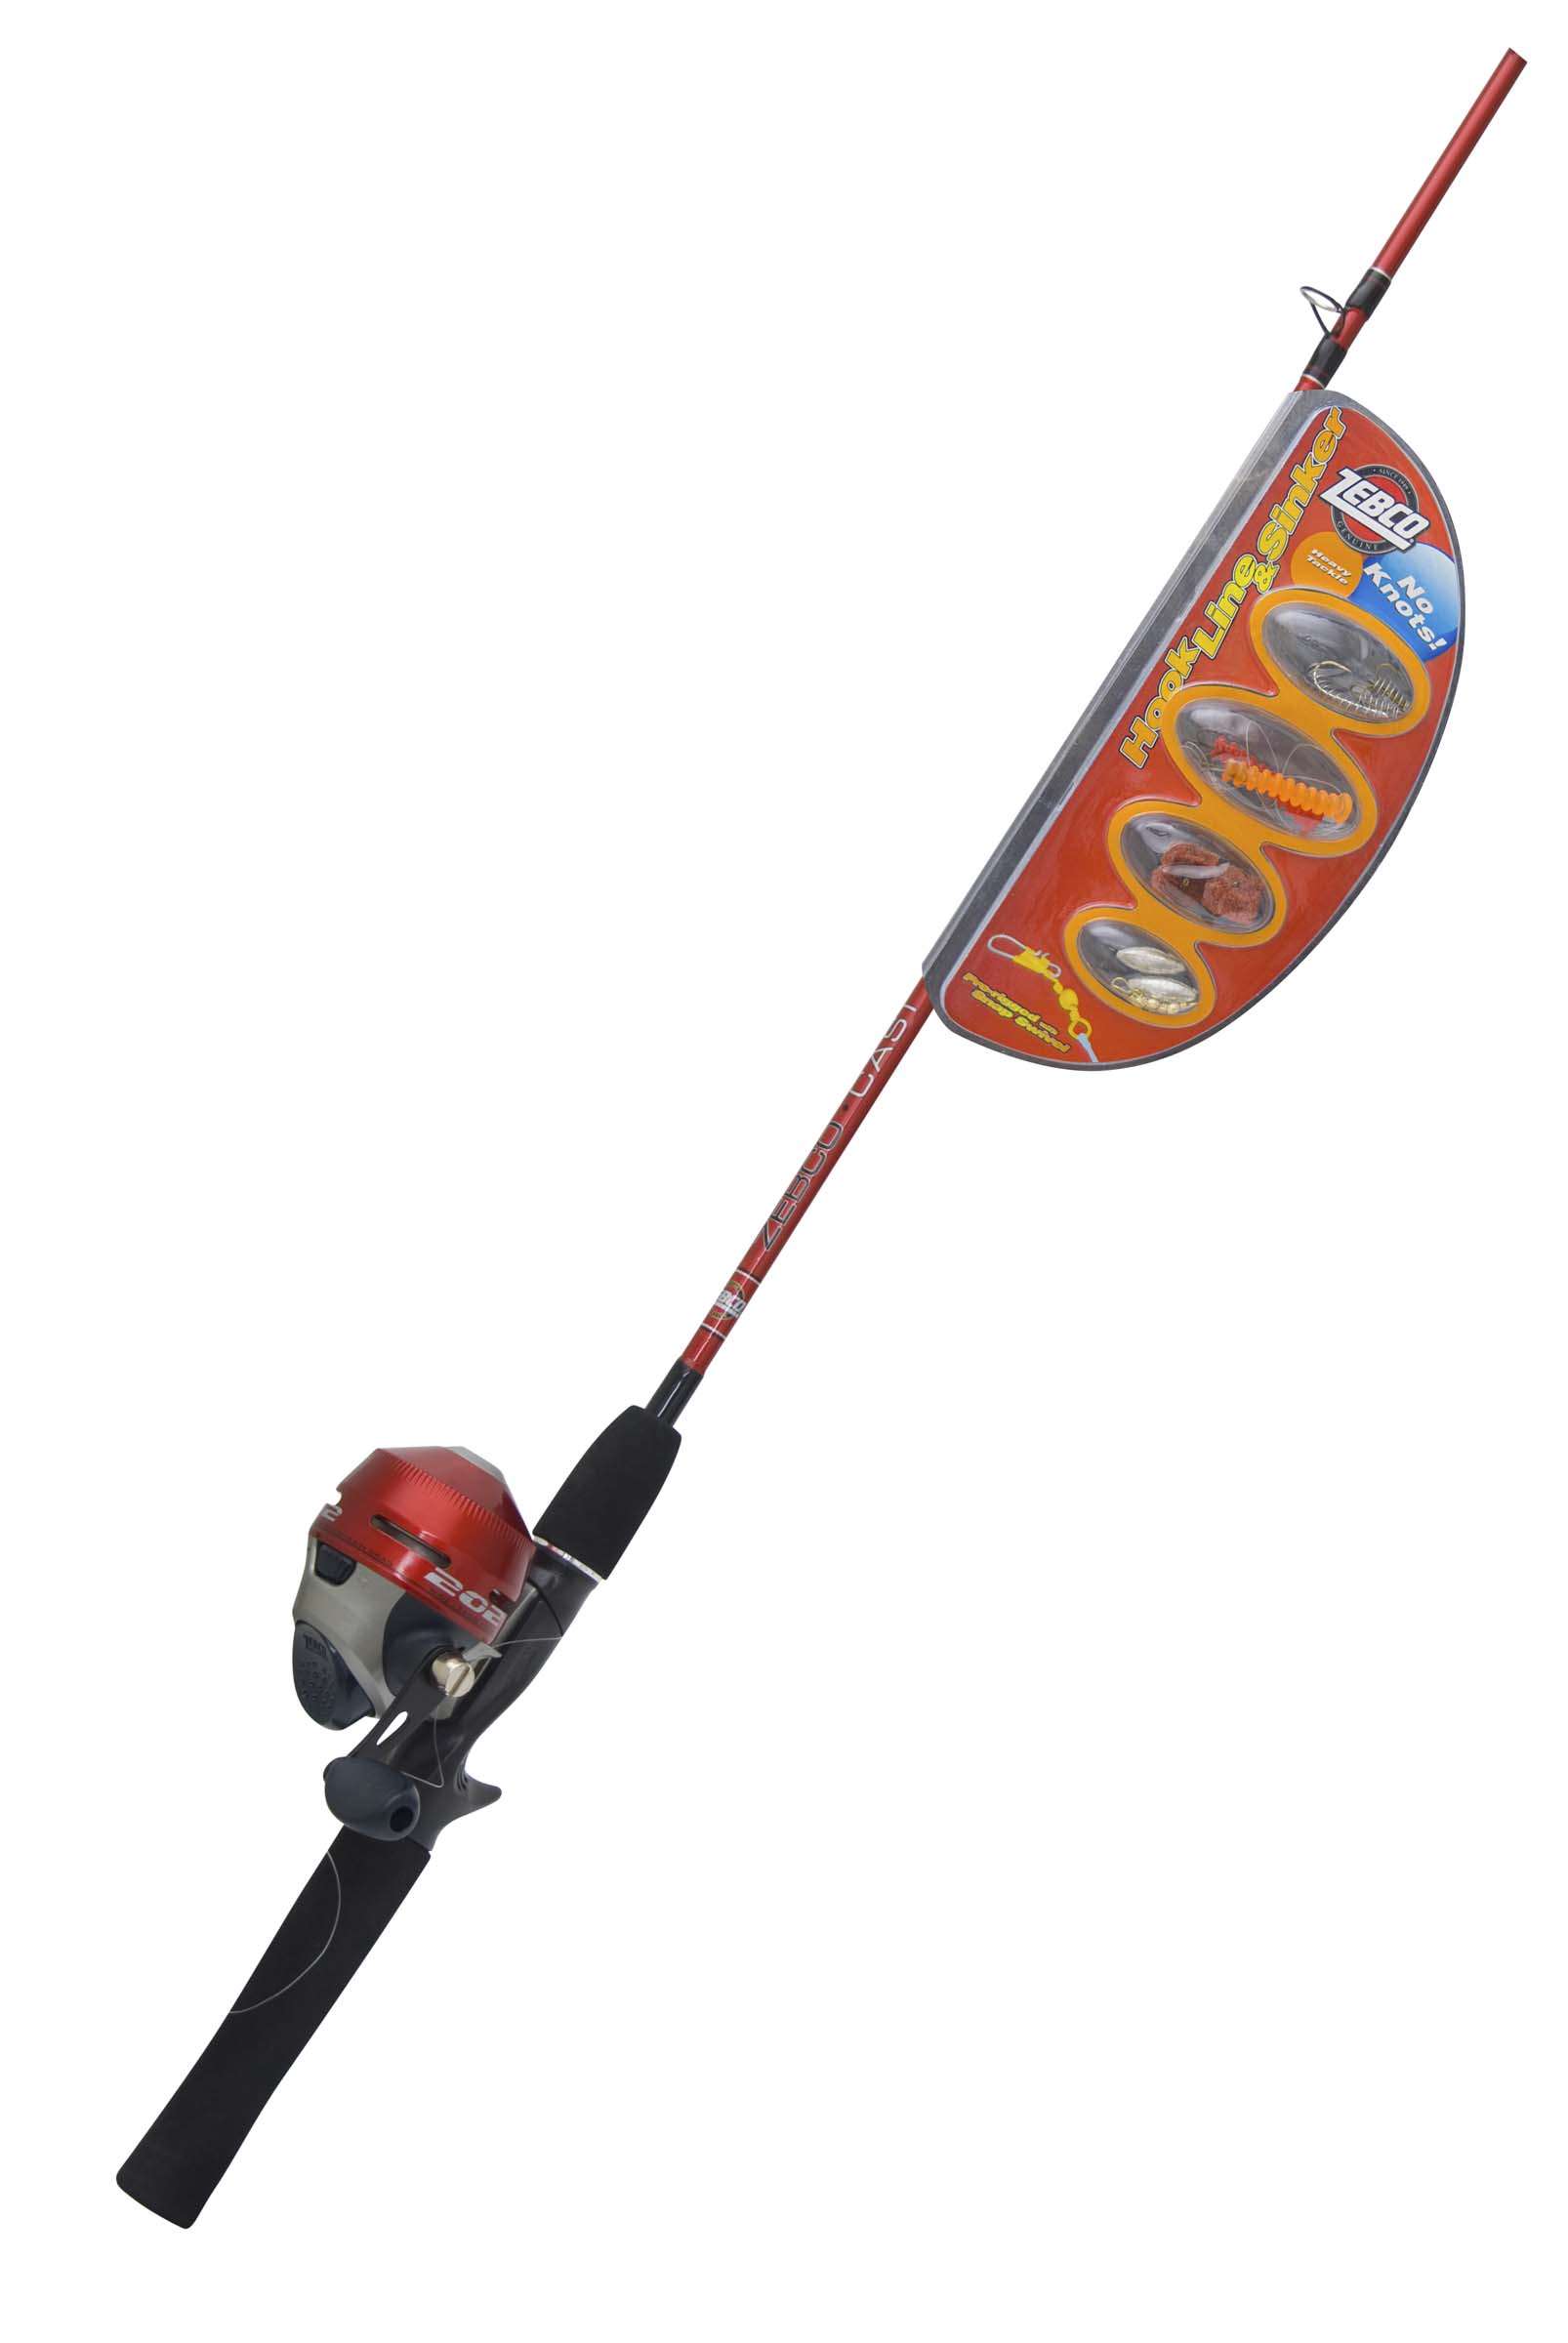 Zebco Hook, Line & Sinker<br>Taking your kids fishing just got easier. This youth combo takes the knots out of fishing with snaps pre-rigged on the line so you spend more time fishing by eliminating one of the most difficult elements for newbies, knots.